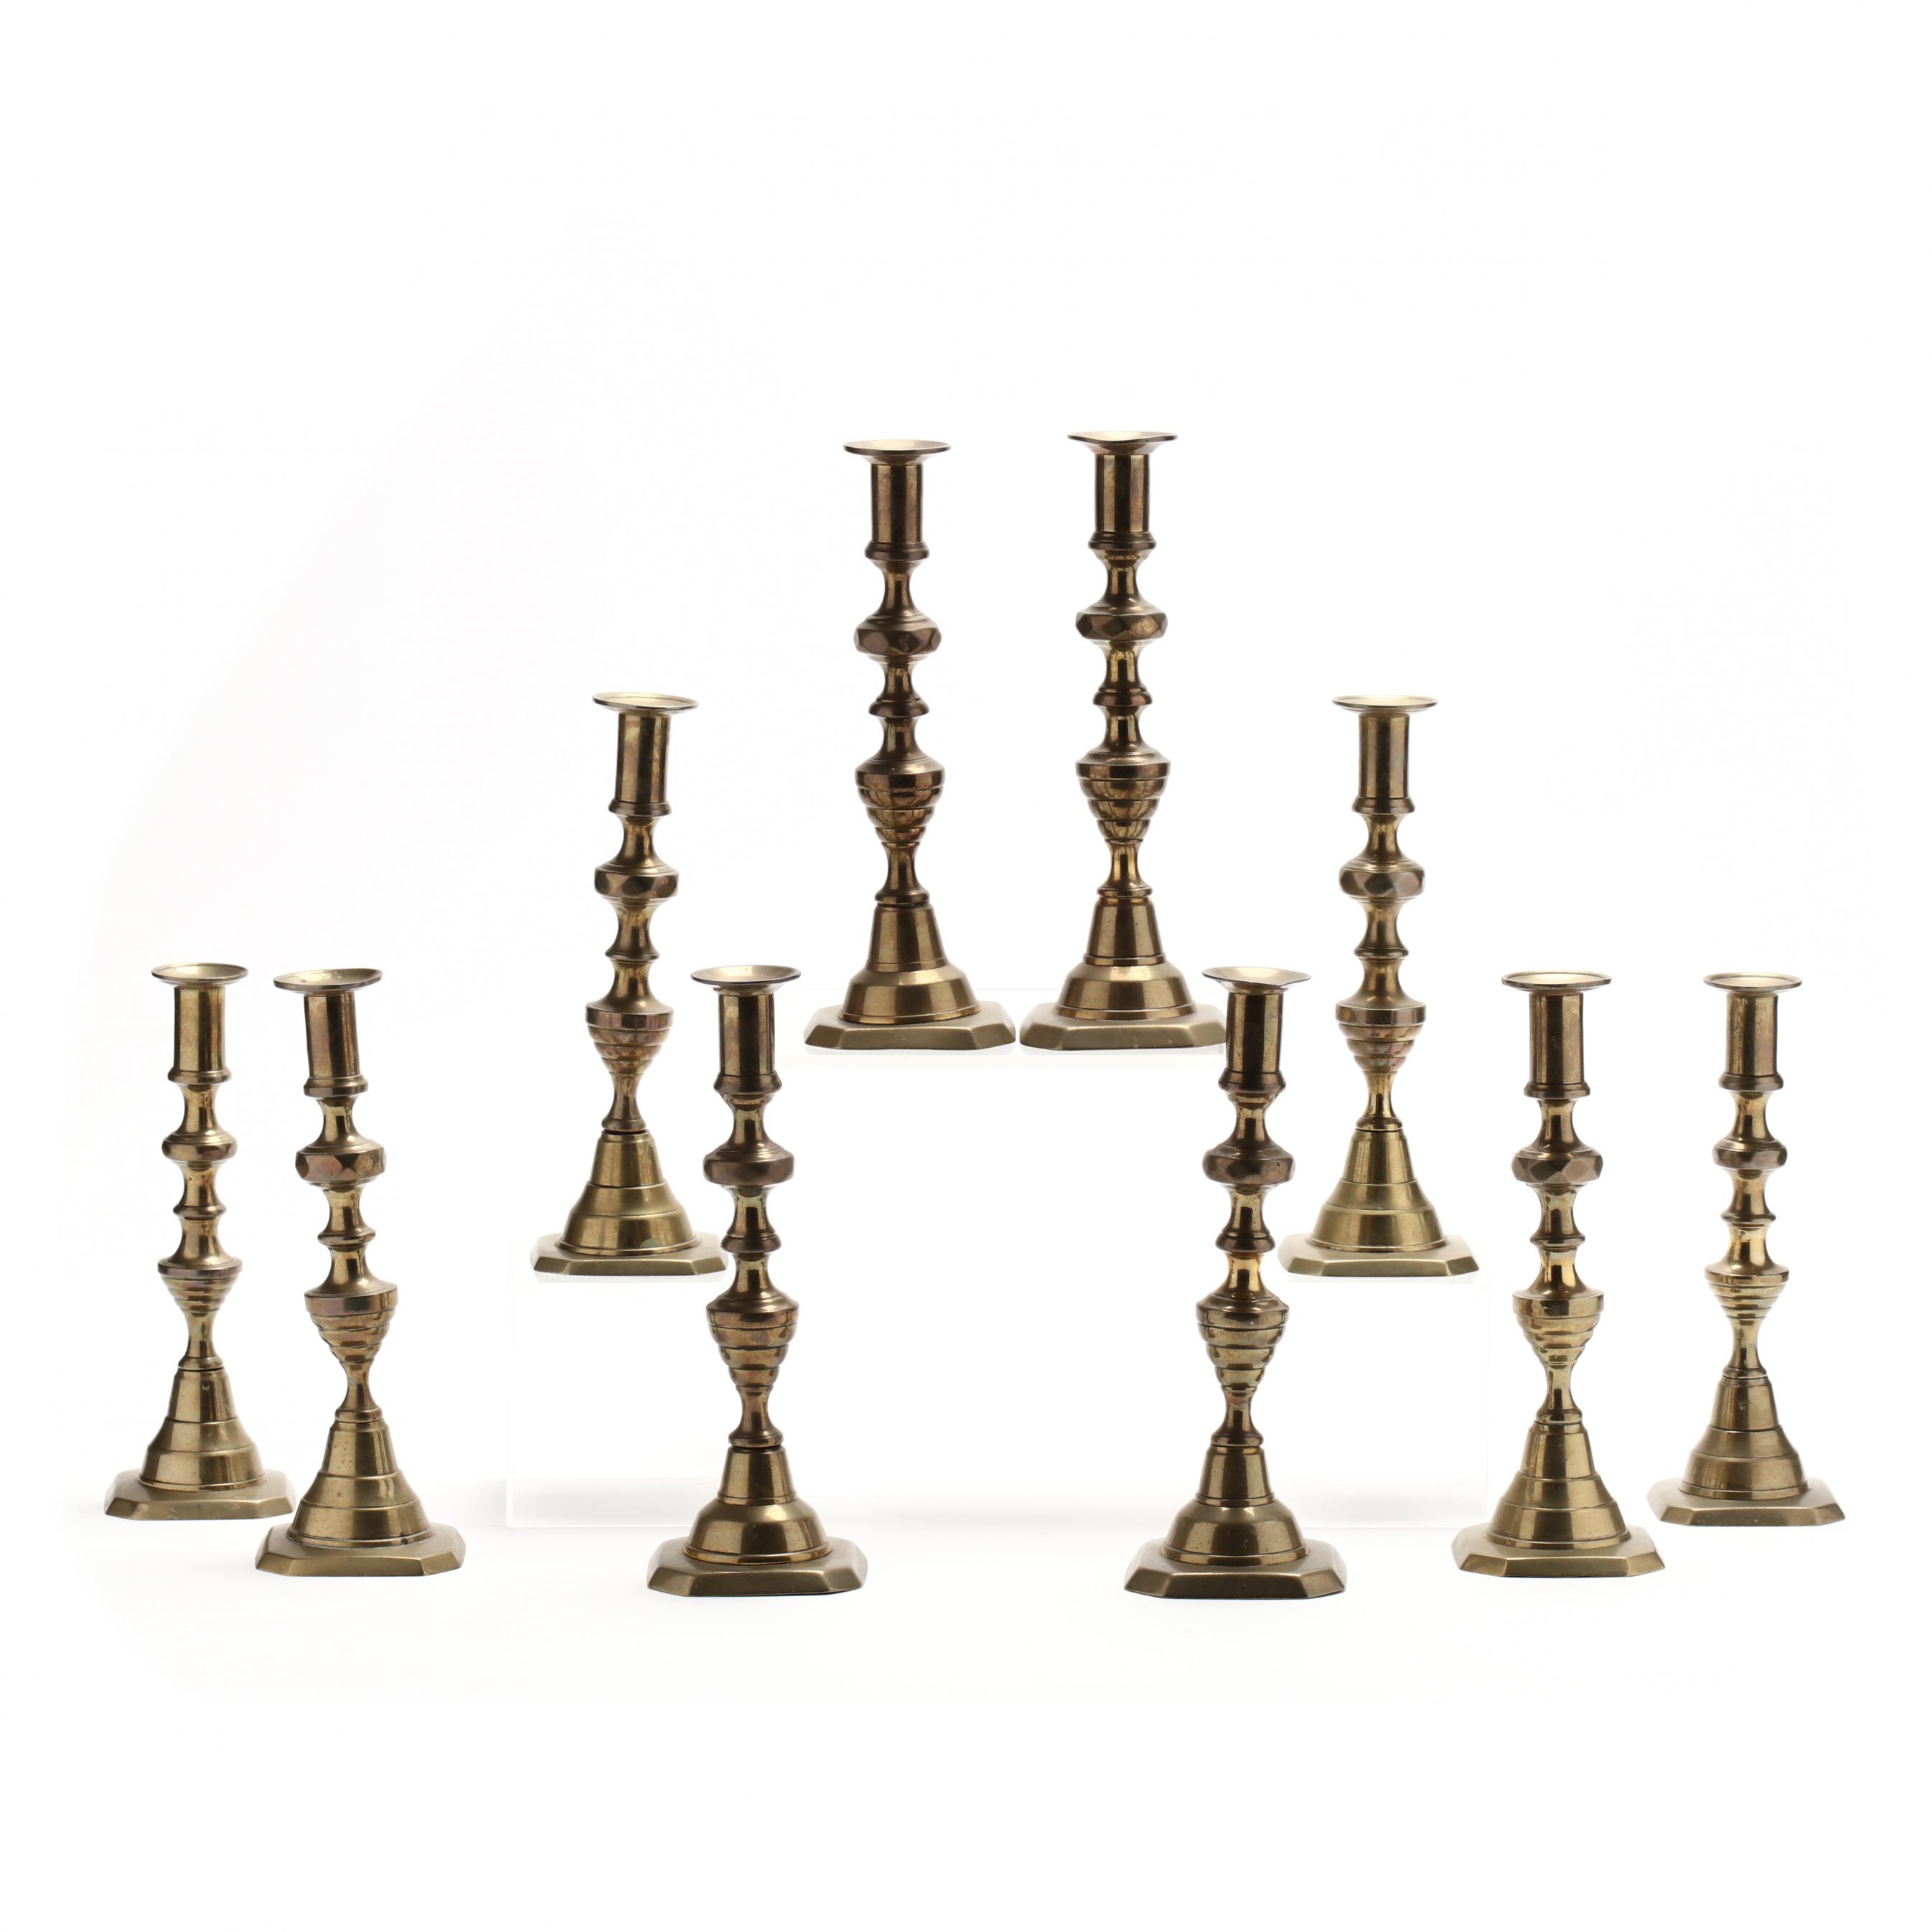 Sold at Auction: PAIR OF ENGLISH BRASS PUSH-UP CANDLESTICKS 19th